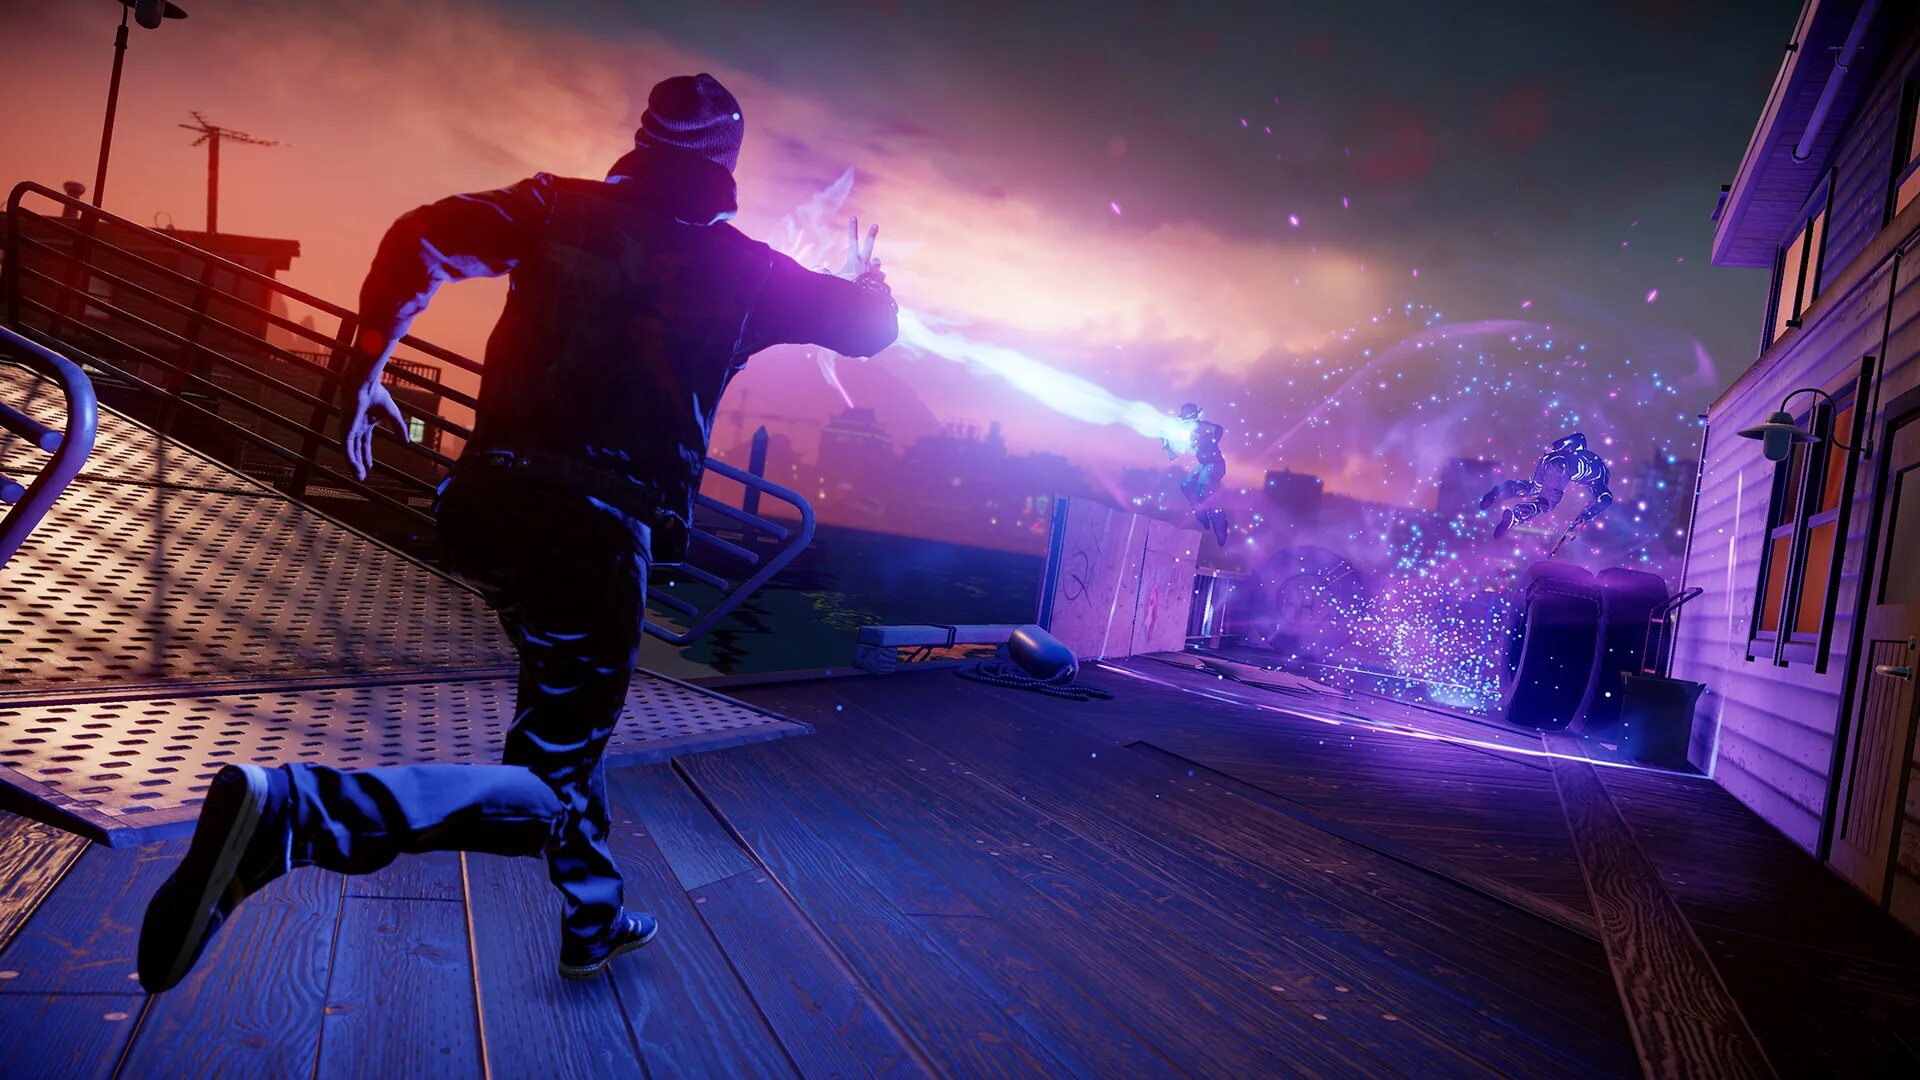 Second секунда. Infamous second son 2. Infamous ps4. Игра инфамоус секонд сон. Infamous second son неон.